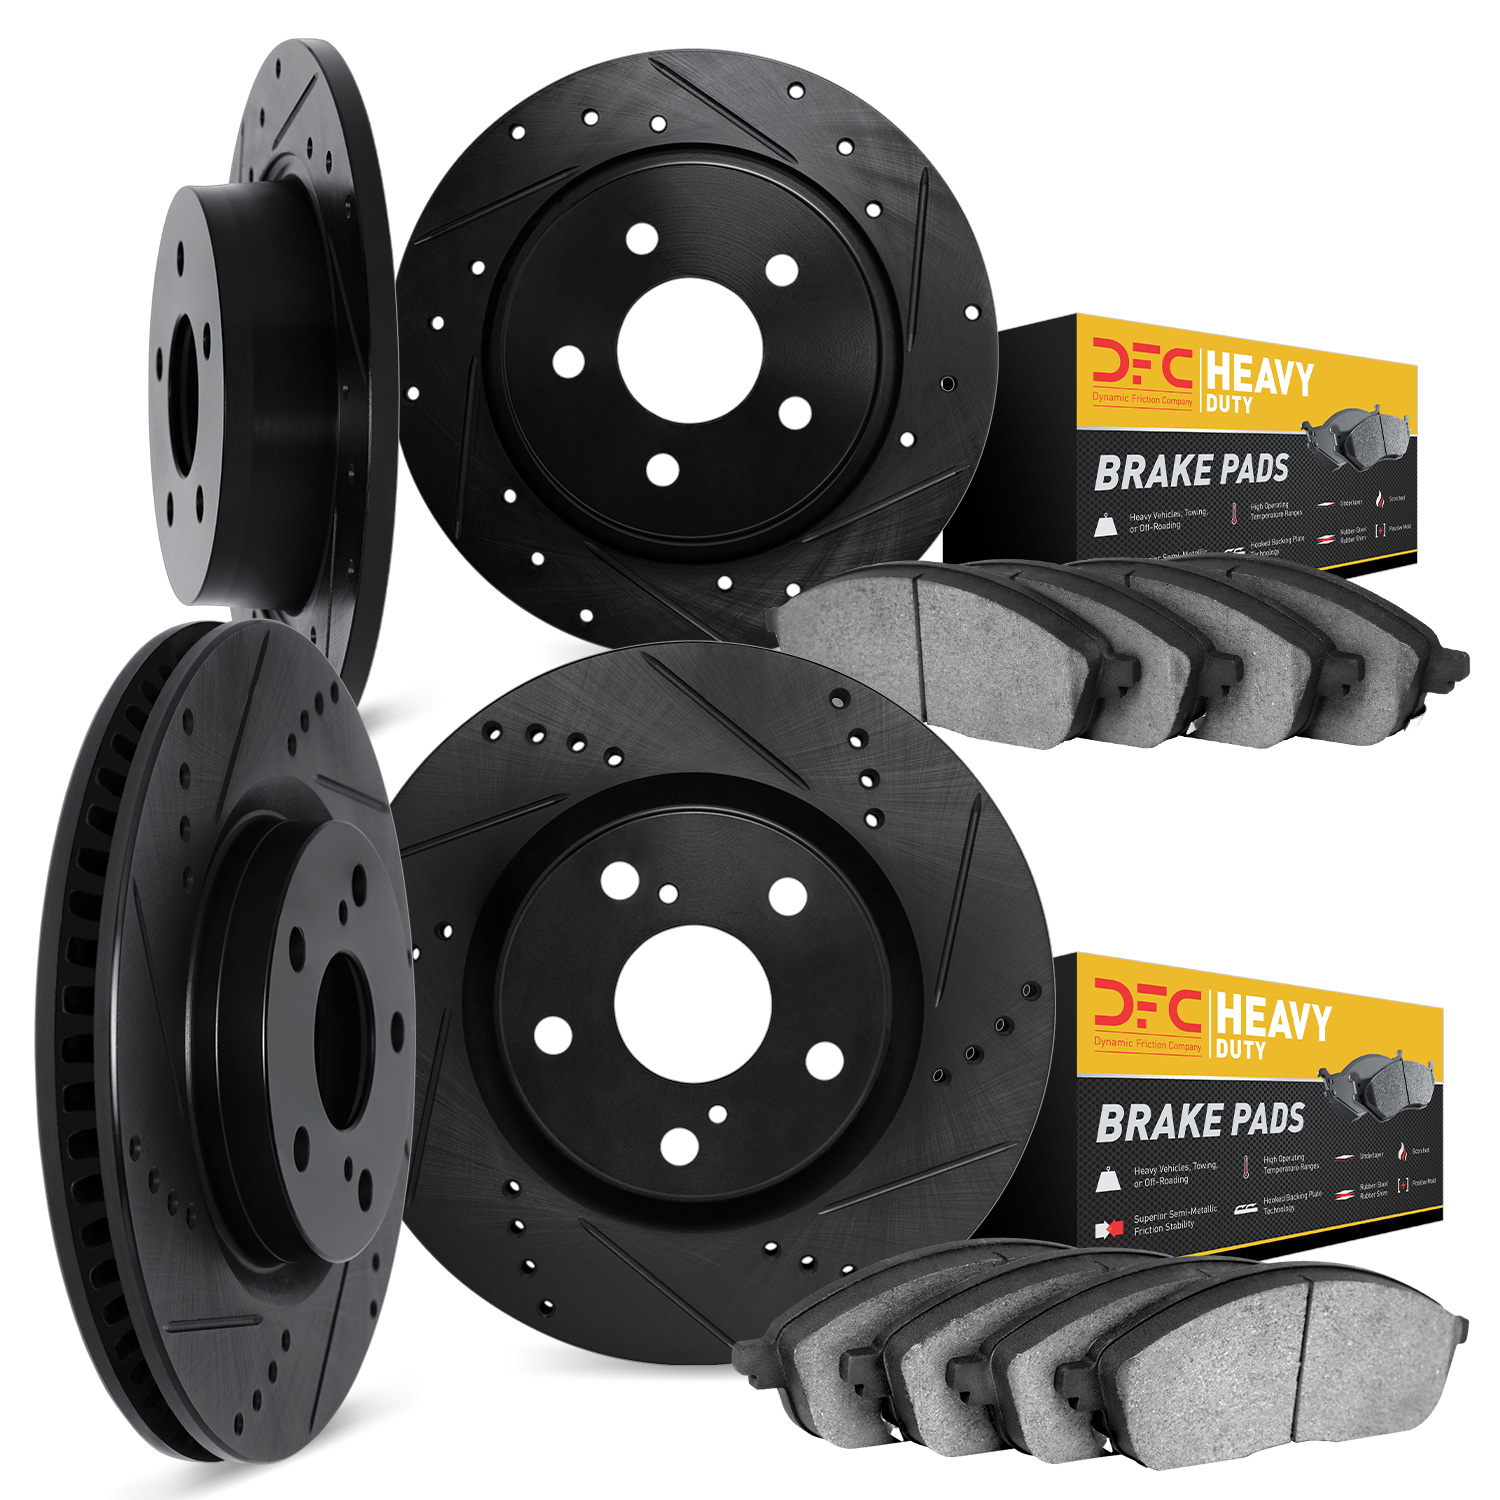 8204-42010 Drilled/Slotted Rotors w/Heavy-Duty Brake Pads Kit [Silver], Fits Select Mopar, Position: Front and Rear